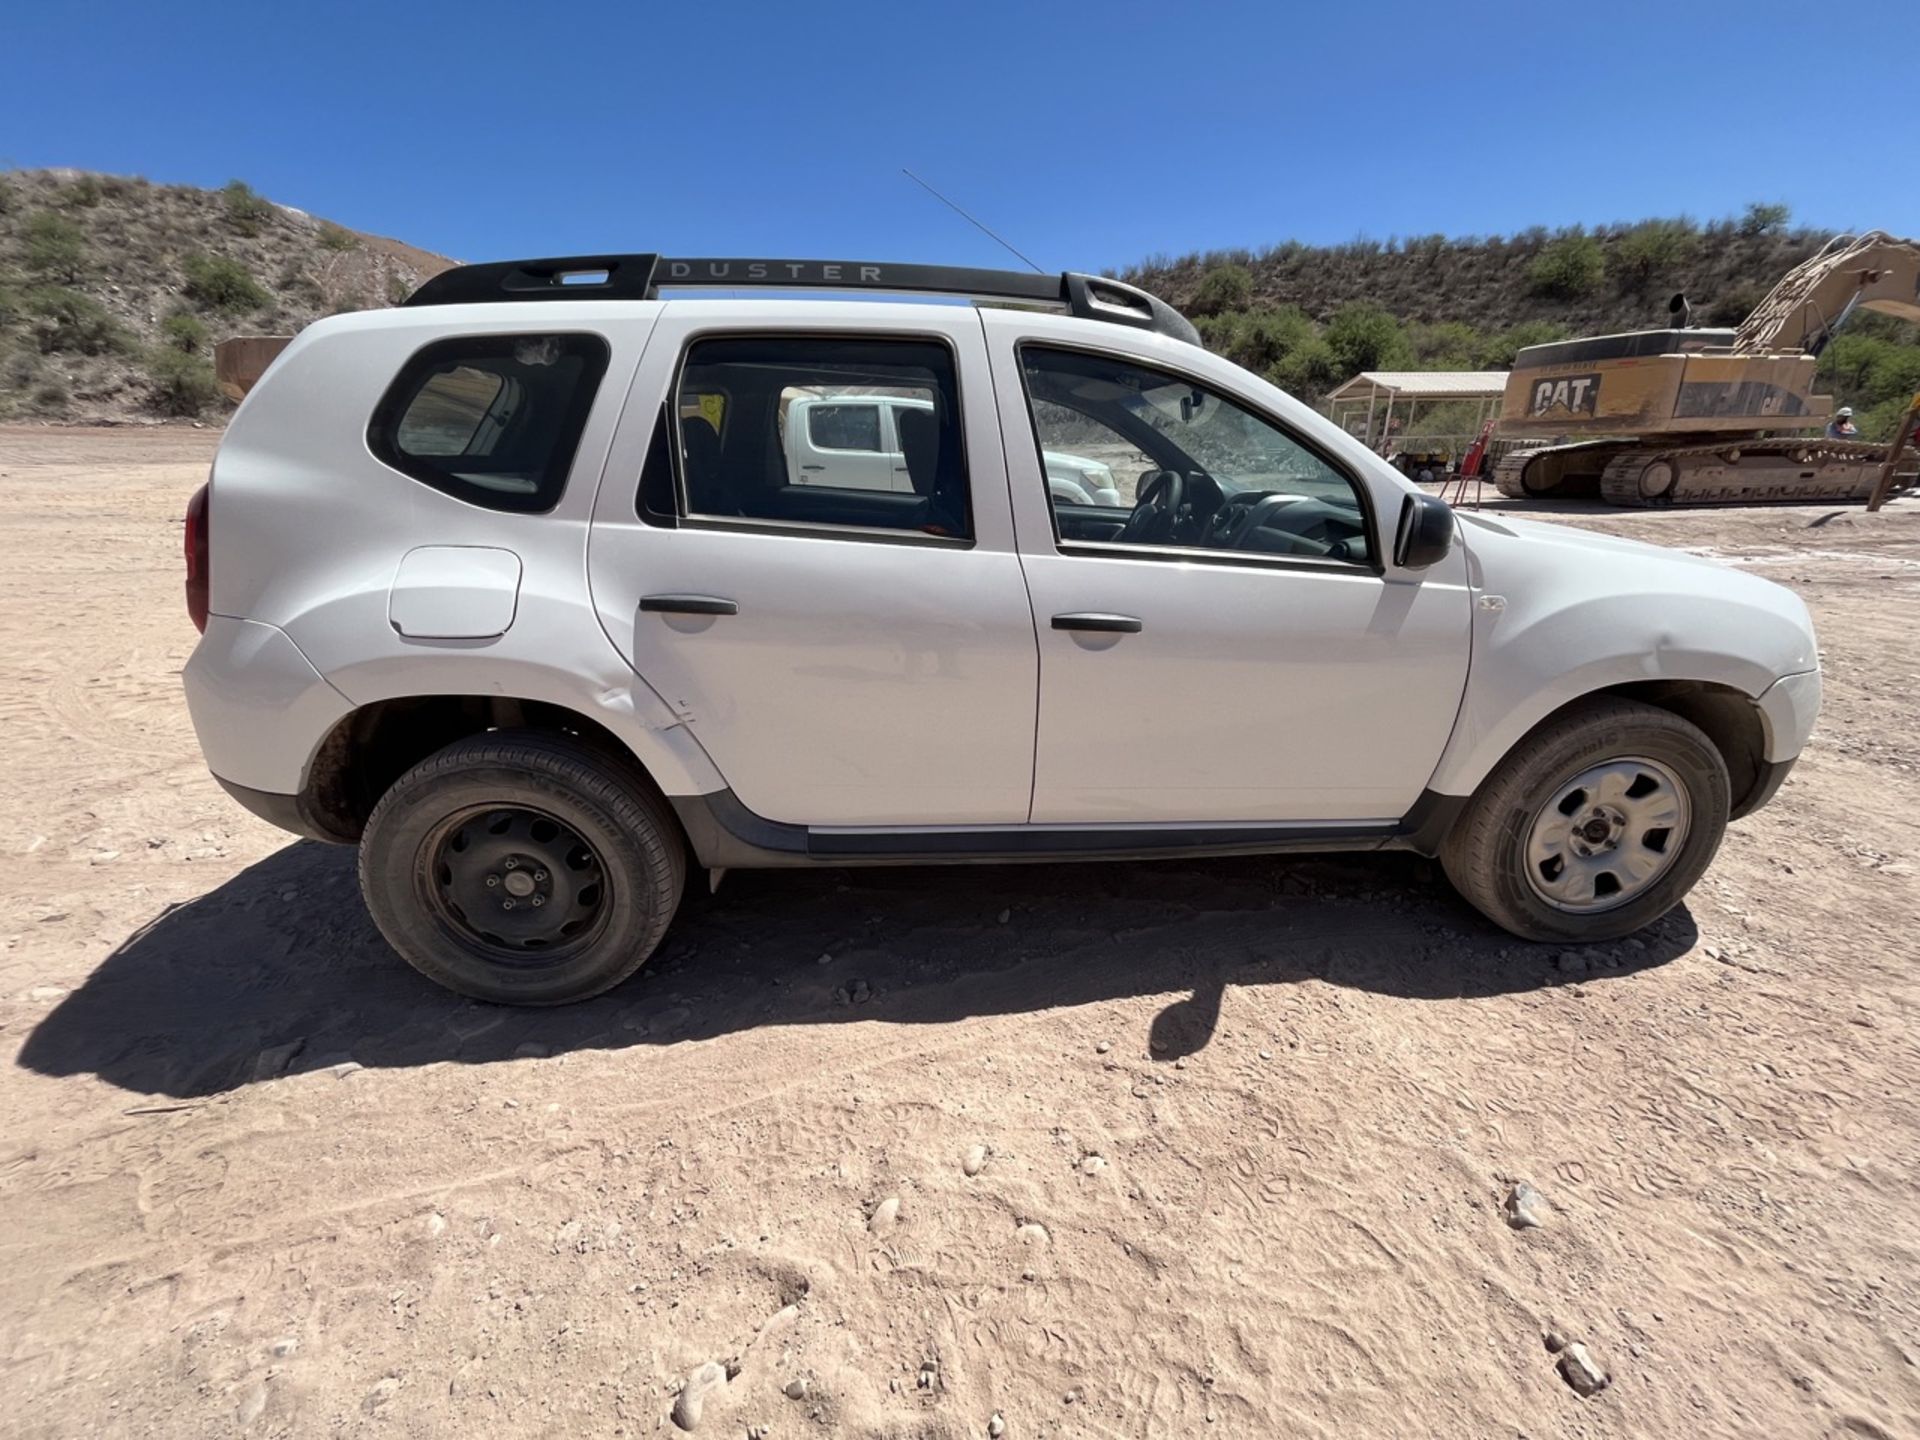 Renault Duster white vehicle, Series 9FBHS1FH4HM590467, Model 2017, automatic transmission, electr - Image 13 of 98